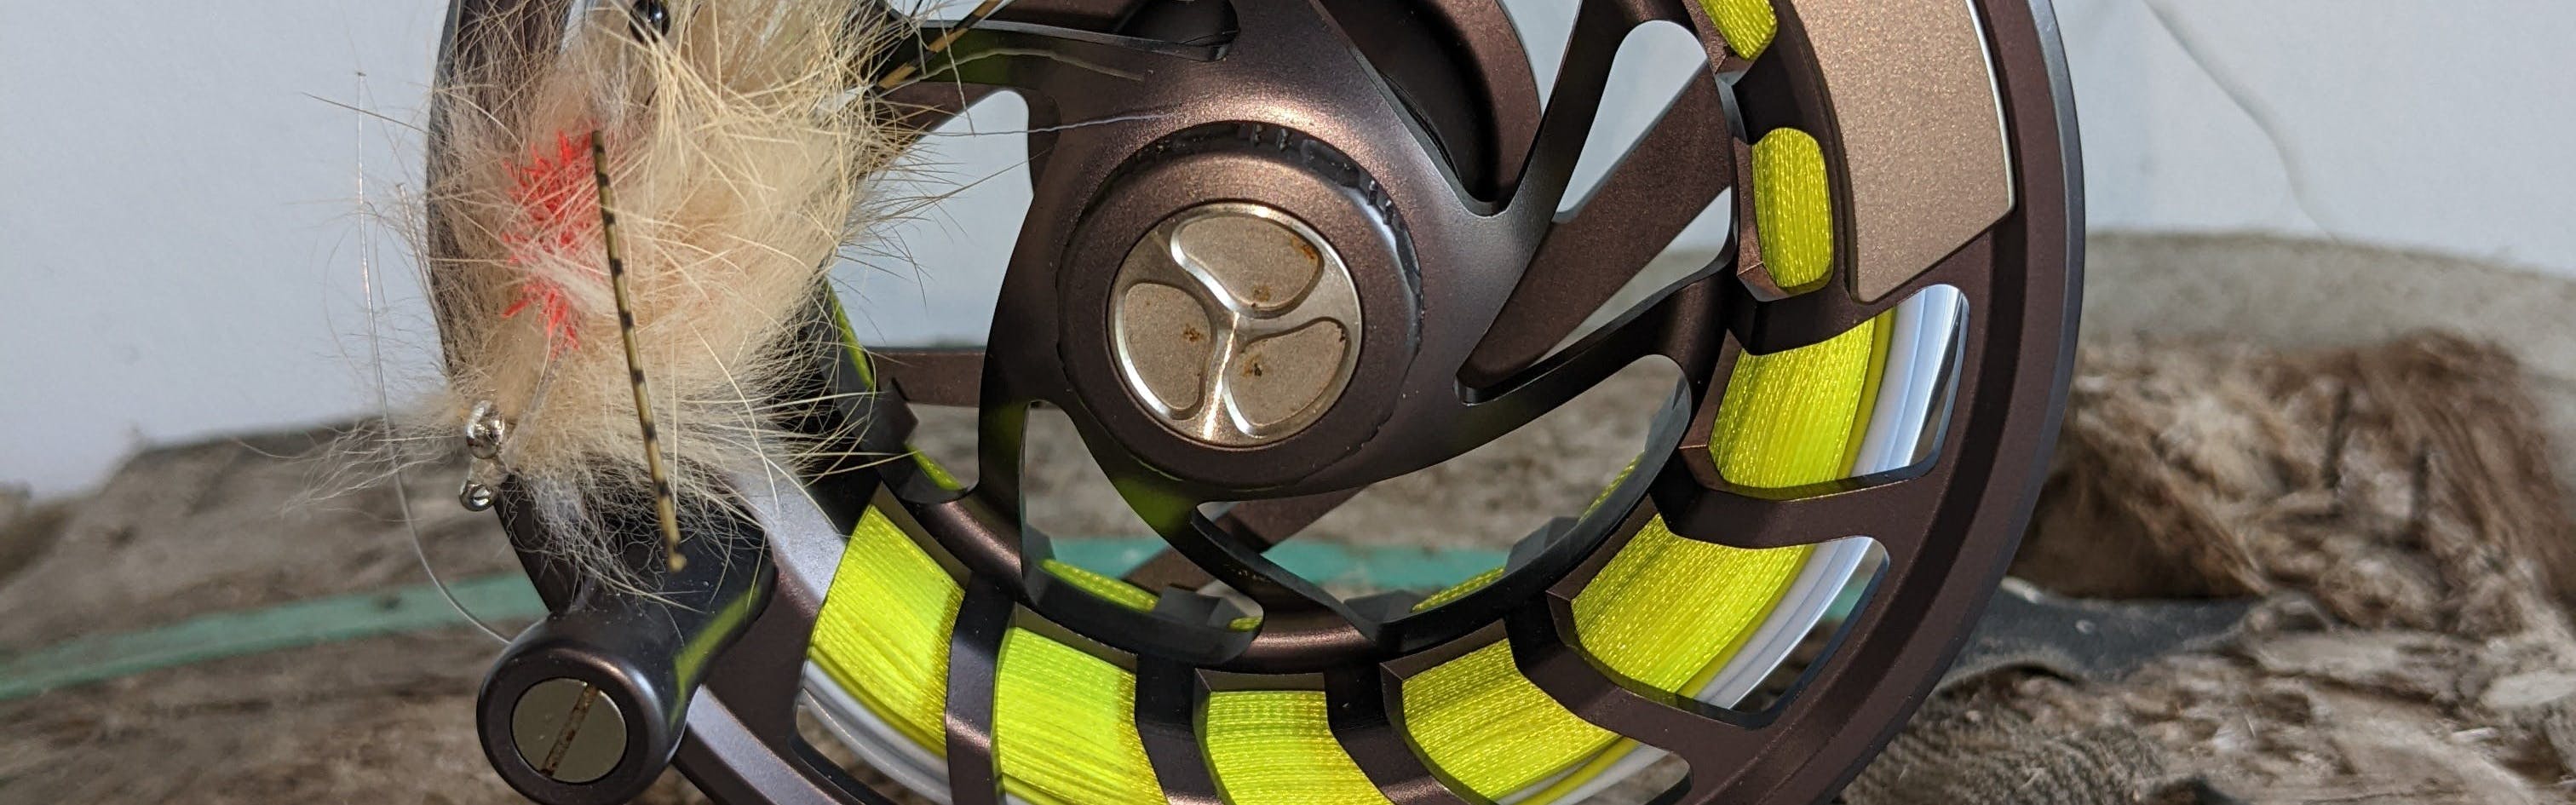 Expert Review: Orvis Mirage USA Fly Reel